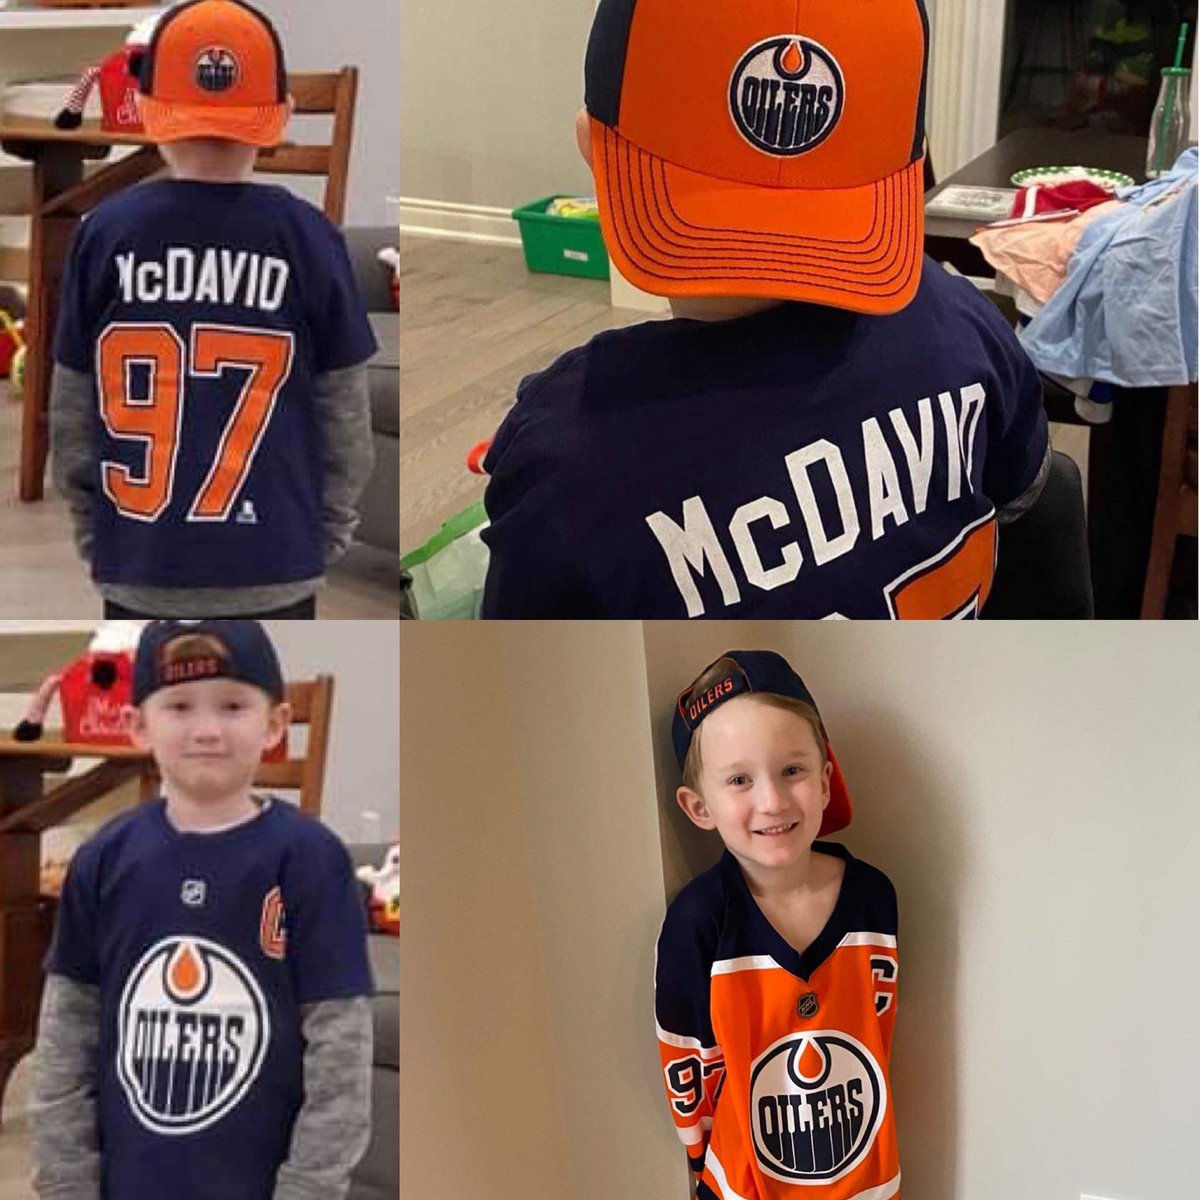 @cmcdavid97 @Rogers @NHL @NHLPA @Rogers #RogersMoments 
Question from 6 year old [McDavid-loving] Asher: What was the most memorable goal of your life - not just in the NHL, but your most memorable goal ever, and why? @nhl @nhlpa